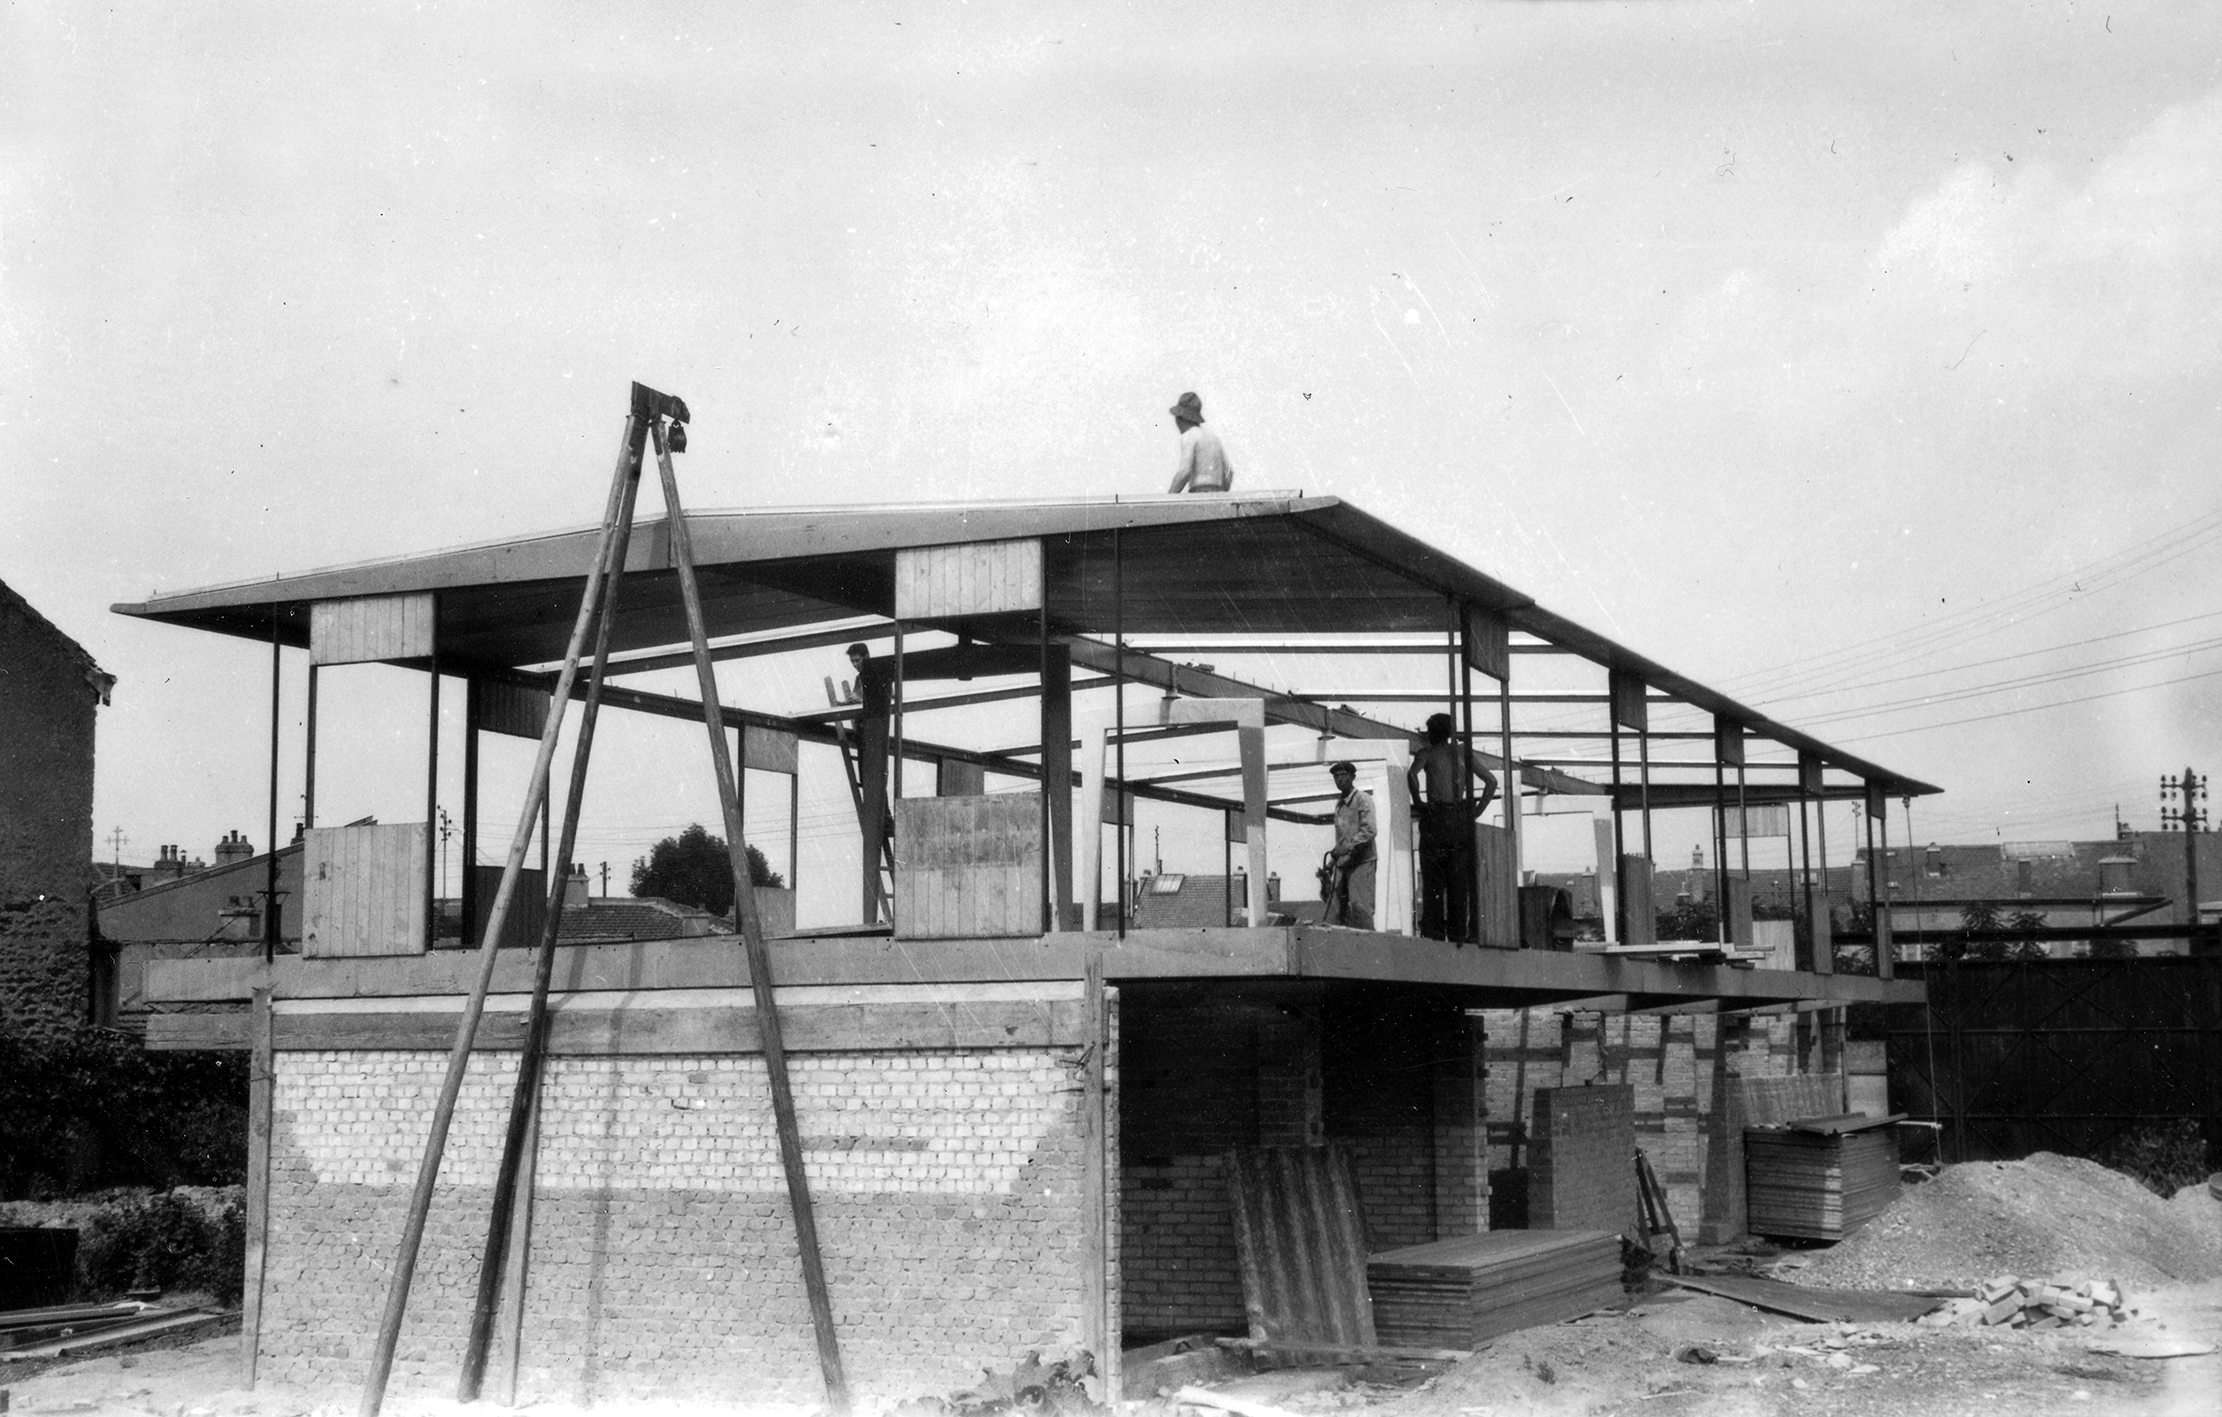 Ferembal house, Nancy. Assembling the metal frame, the facing panels and the wooden floor, summer 1948.